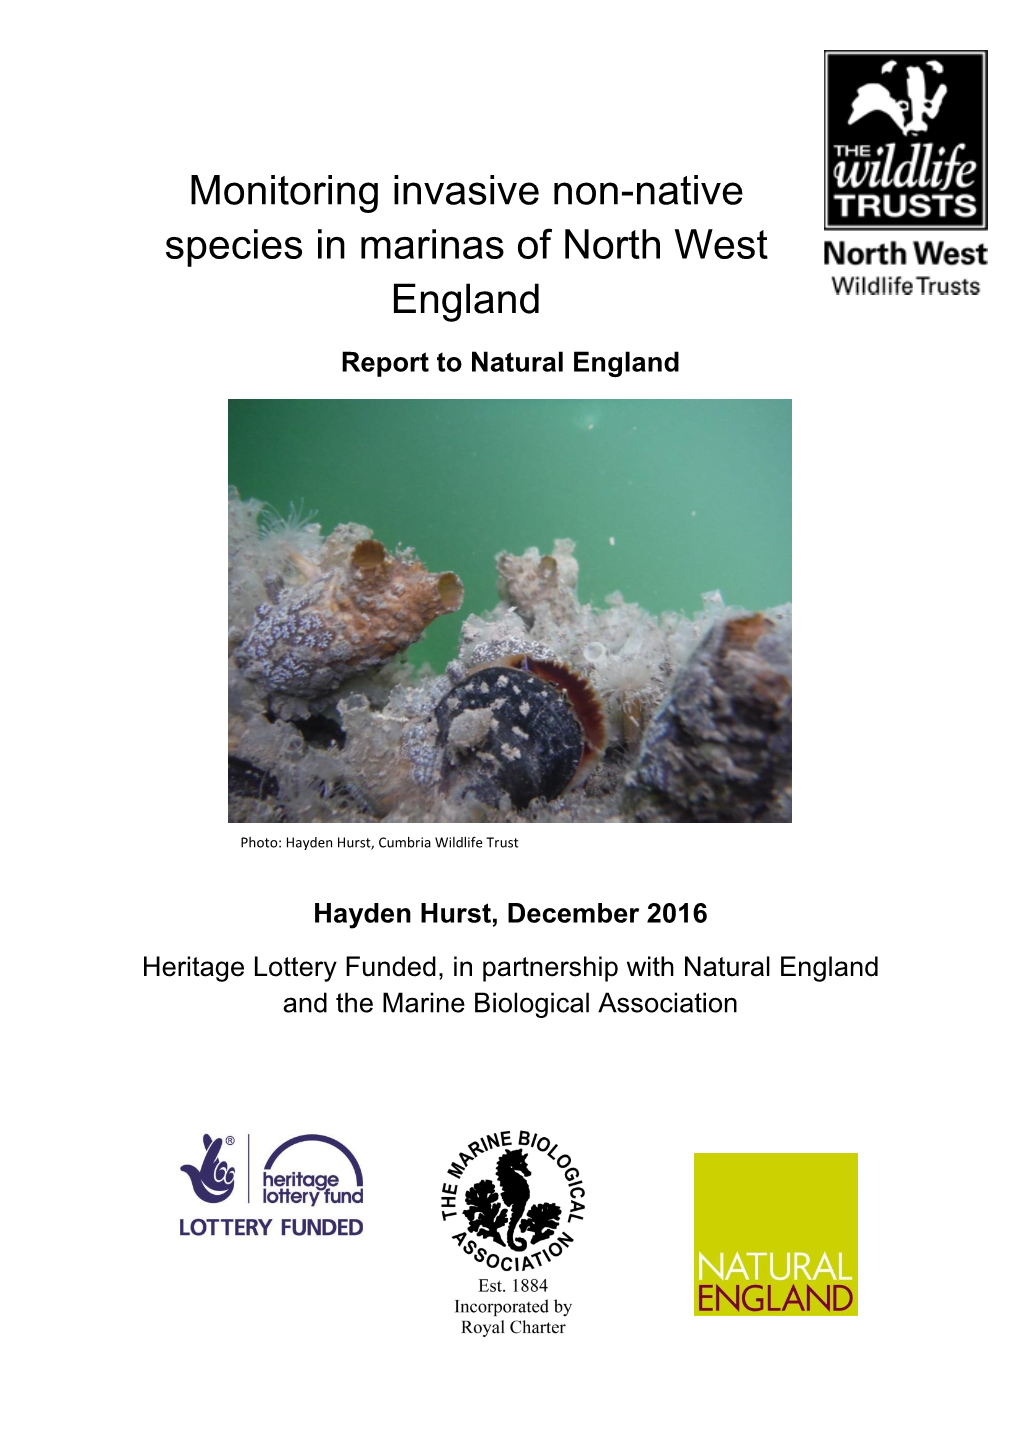 Monitoring Invasive Non-Native Species in Marinas of North West England